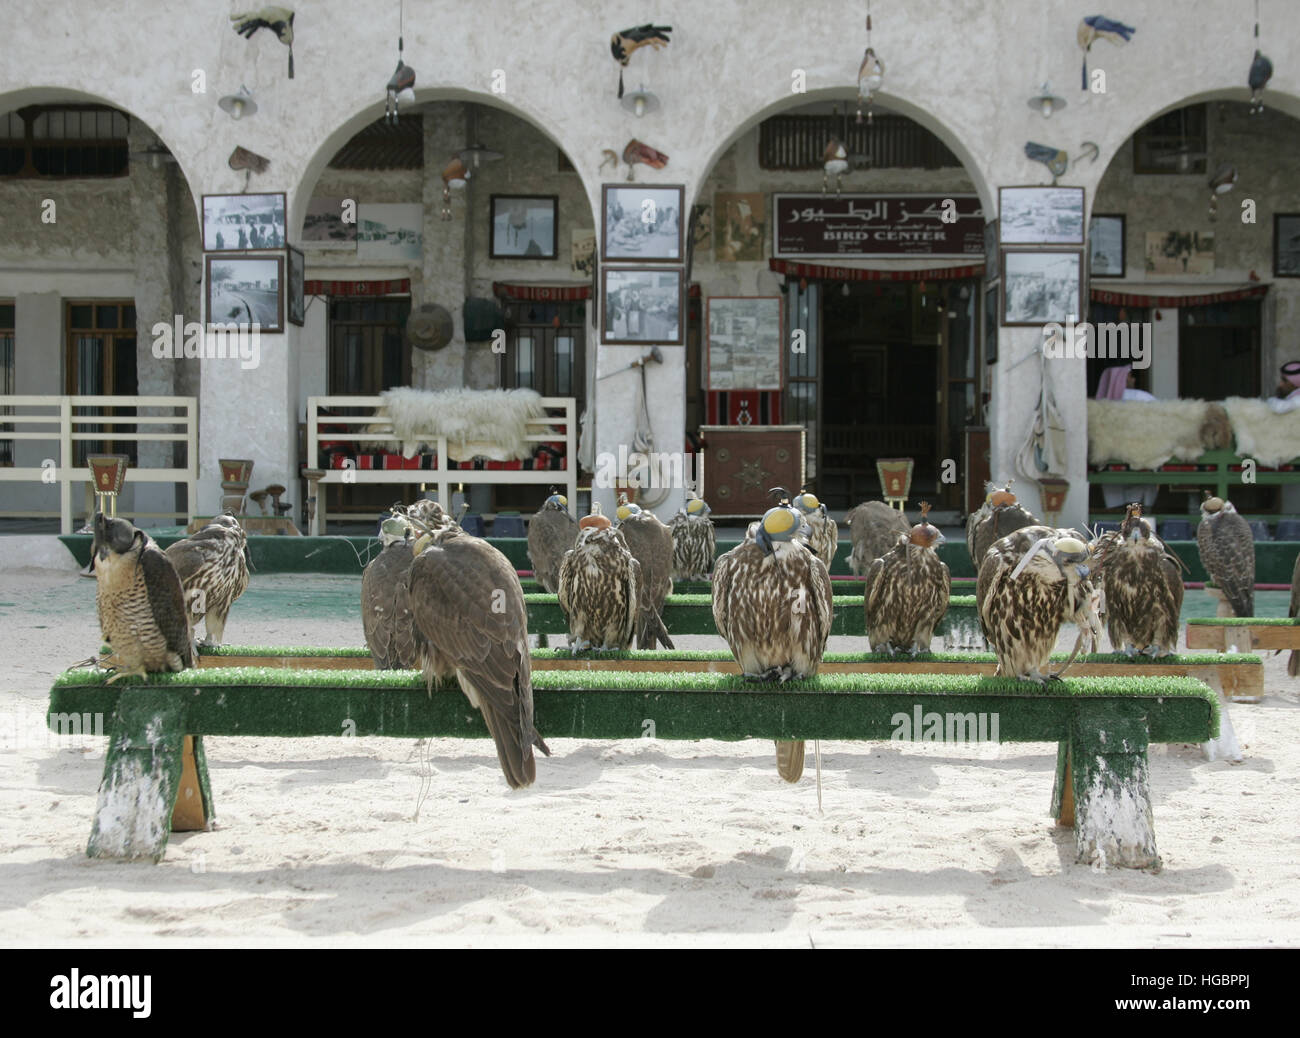 Qatar, Doha, falcons are sitting in front of a falconer's shop Stock Photo